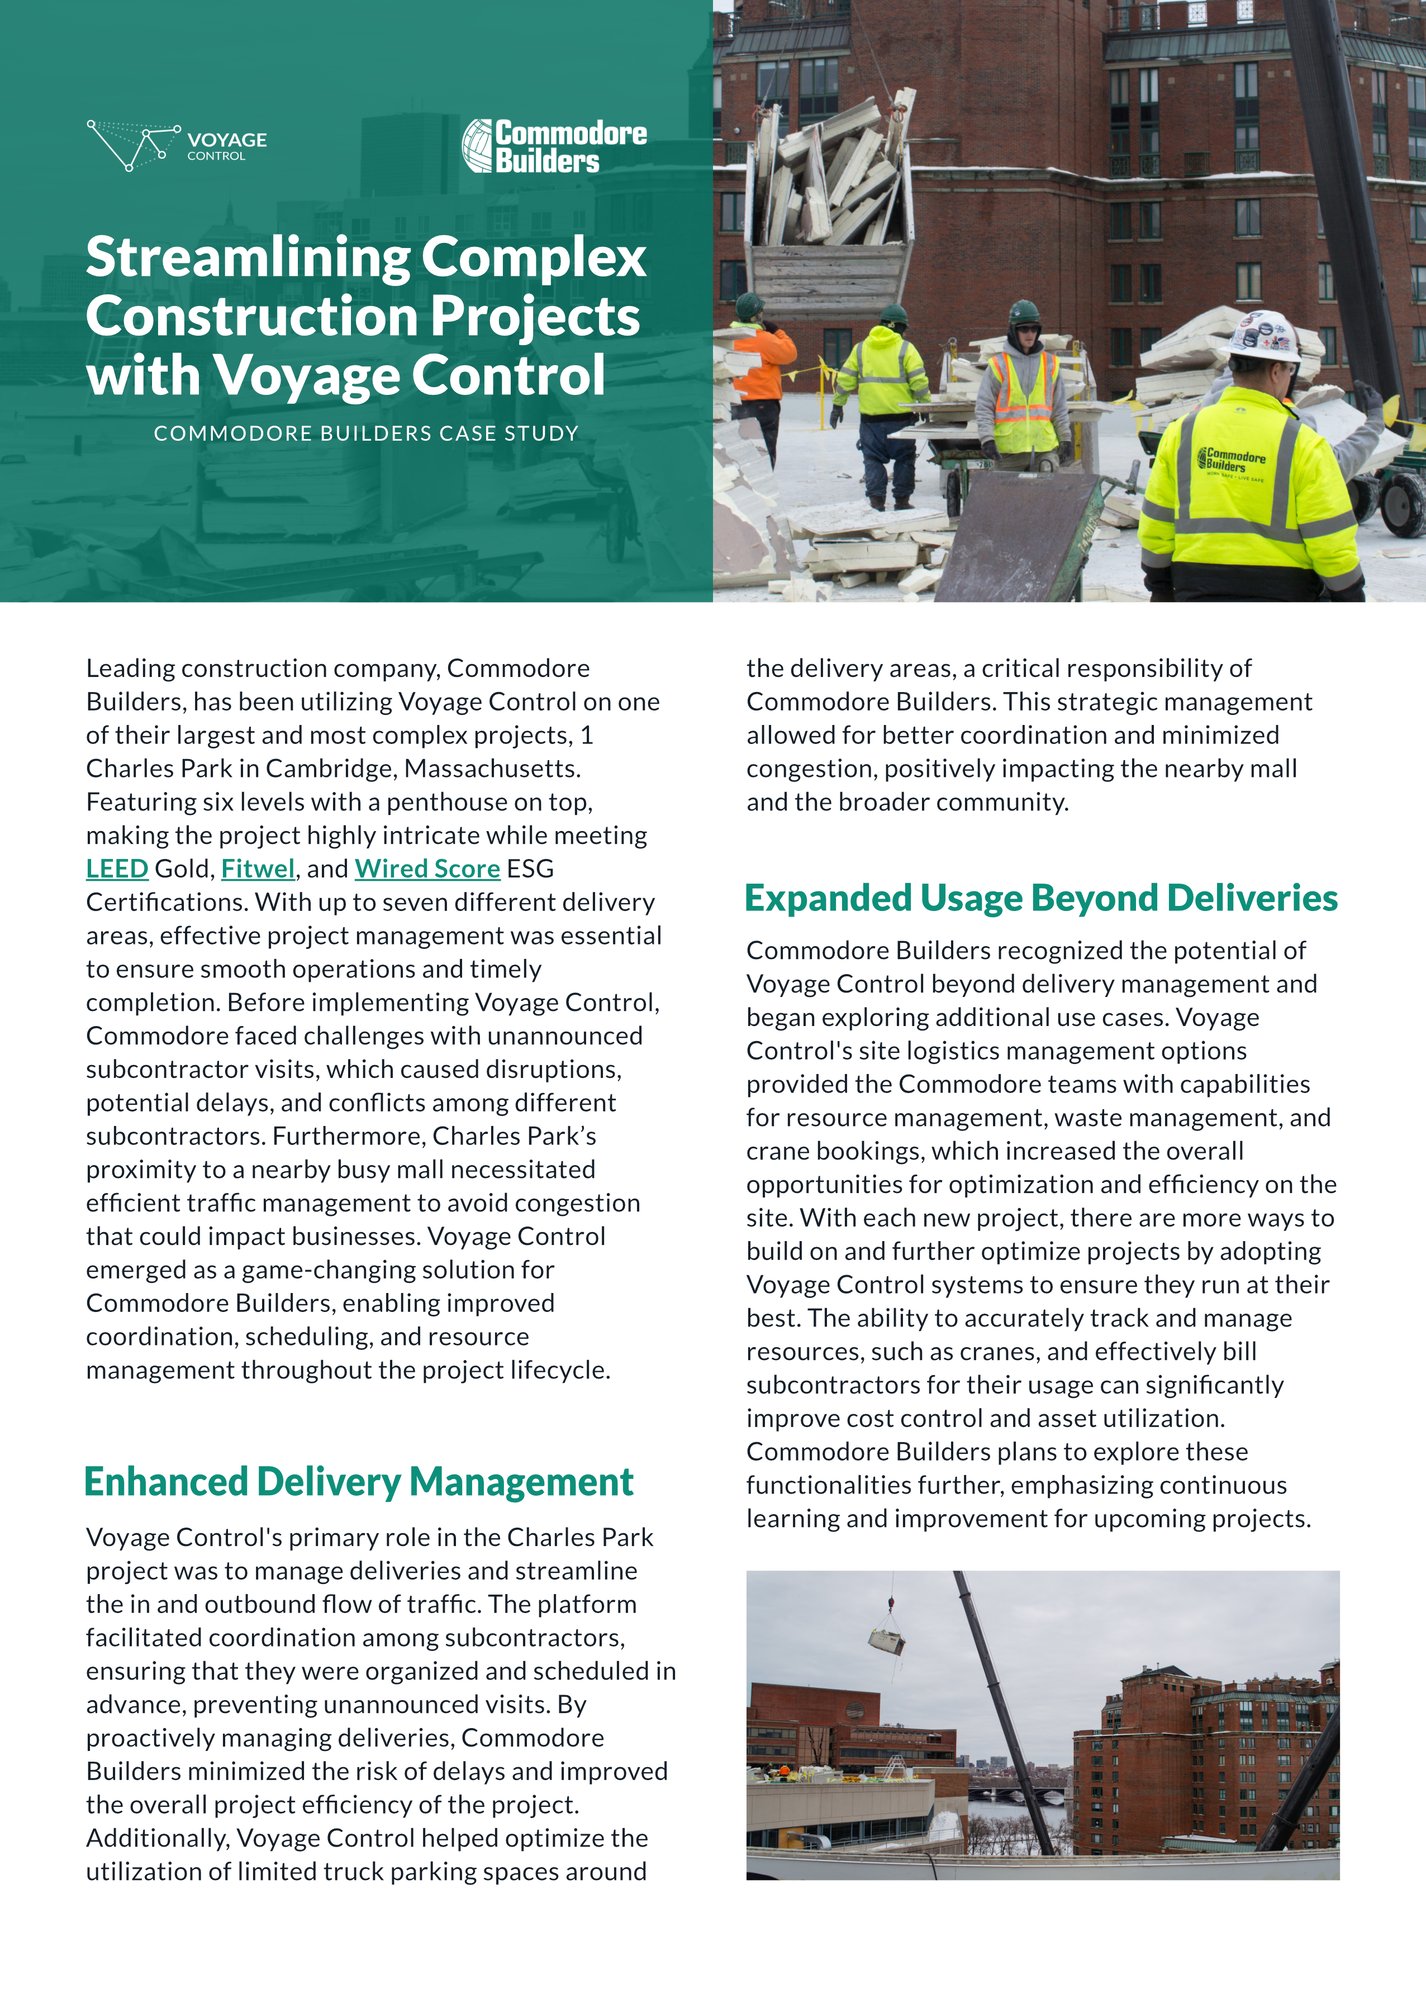 Streamlining Complex Construction Projects with Voyage Control - Commodore Builders Case Study